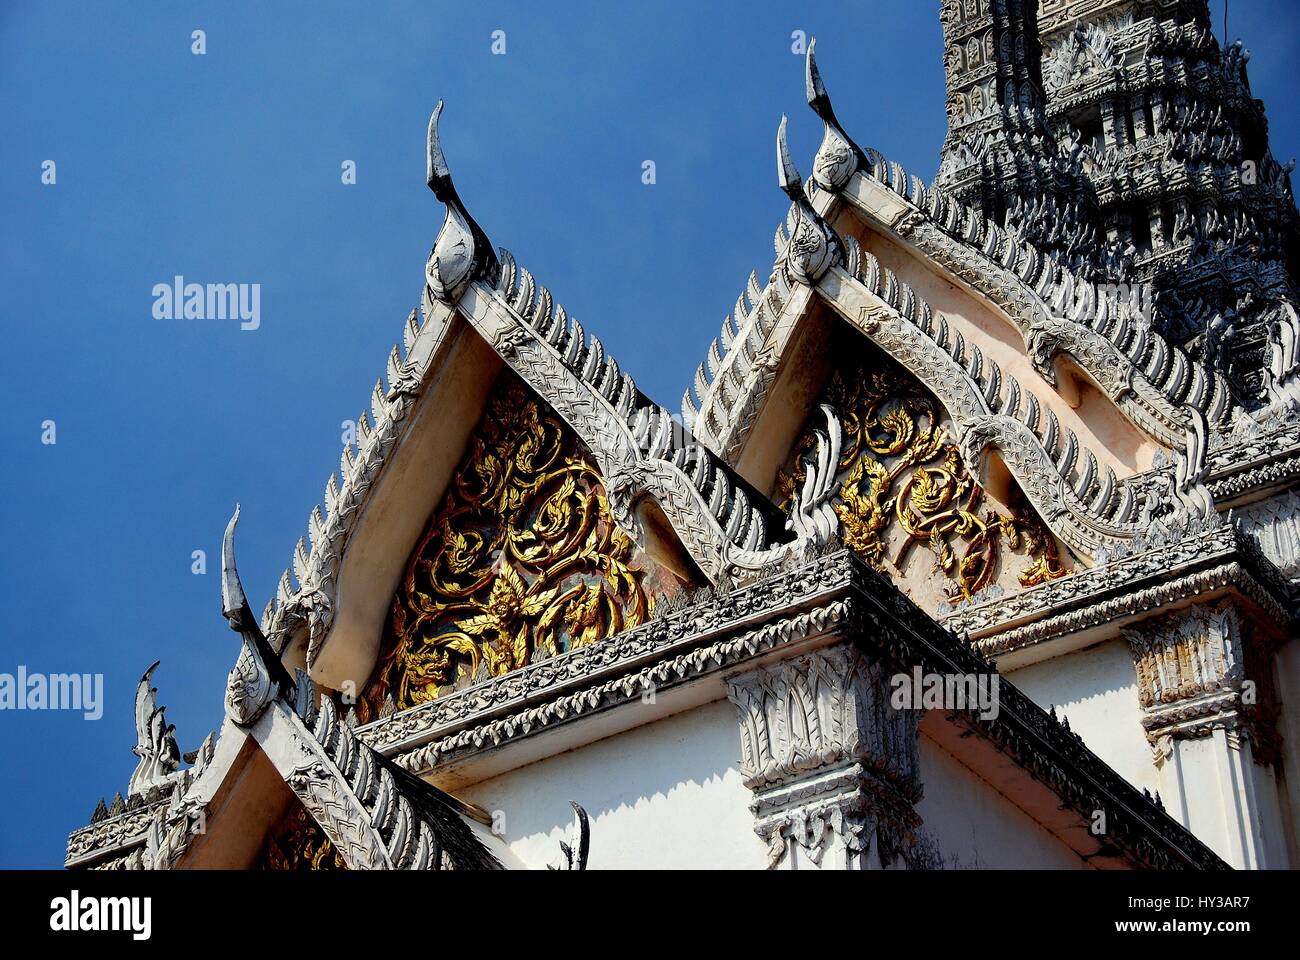 Phetchaburi, Thailand - January 3, 2010:  Phra Thinang Wichien Prasat with chofah ornaments and gilded tympanum leaf designs in front of the central P Stock Photo